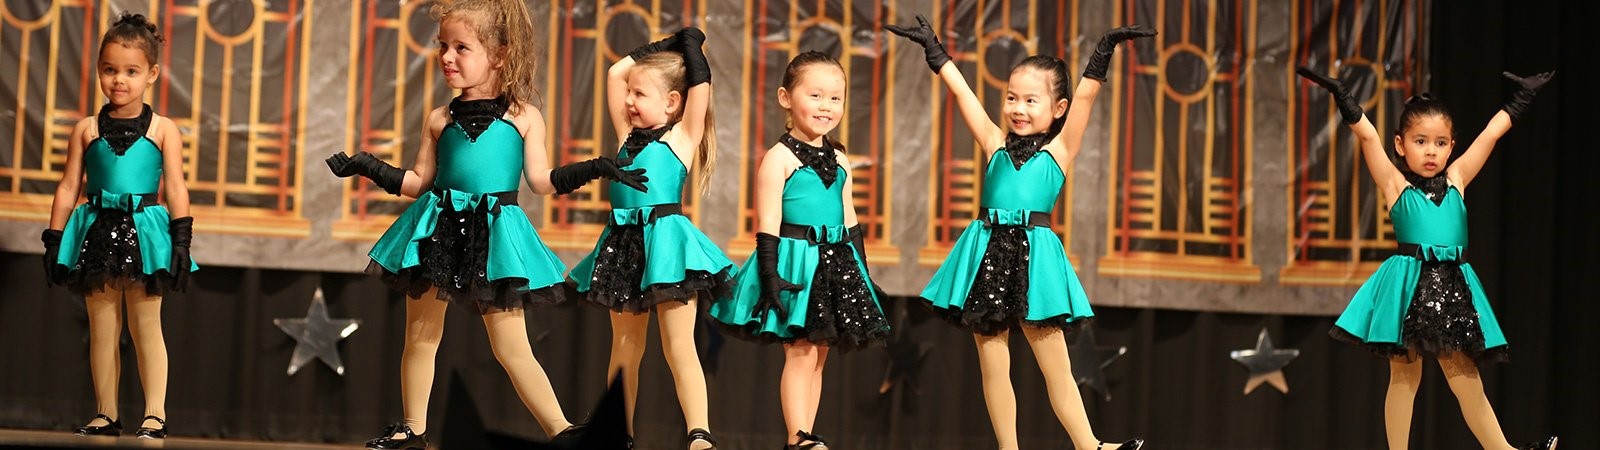 little girls on stage in their dance costumes